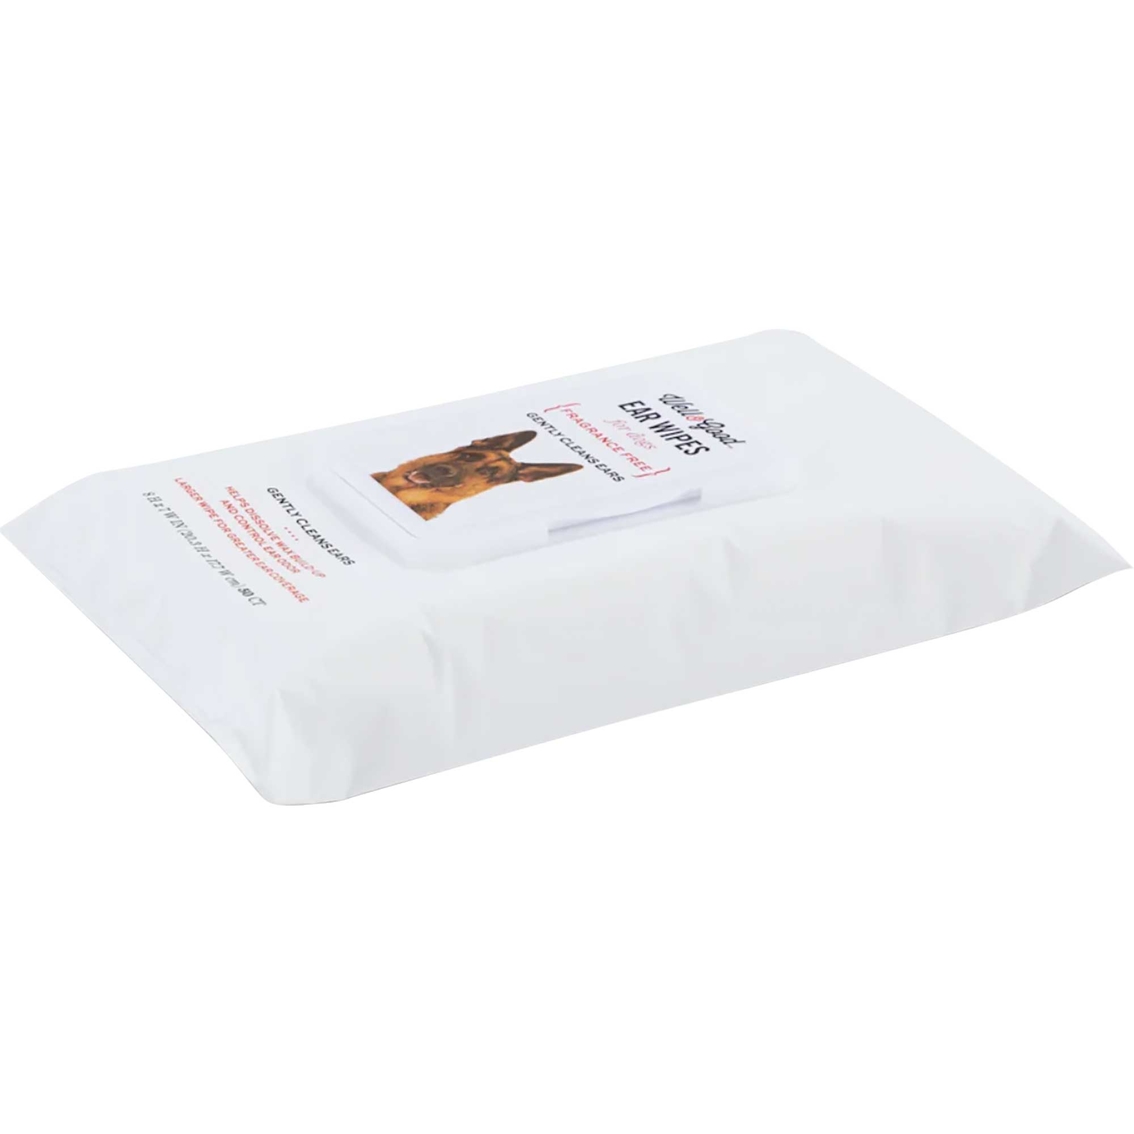 Well & Good Large Dog Ear Wipes 50 pk. - Image 2 of 2